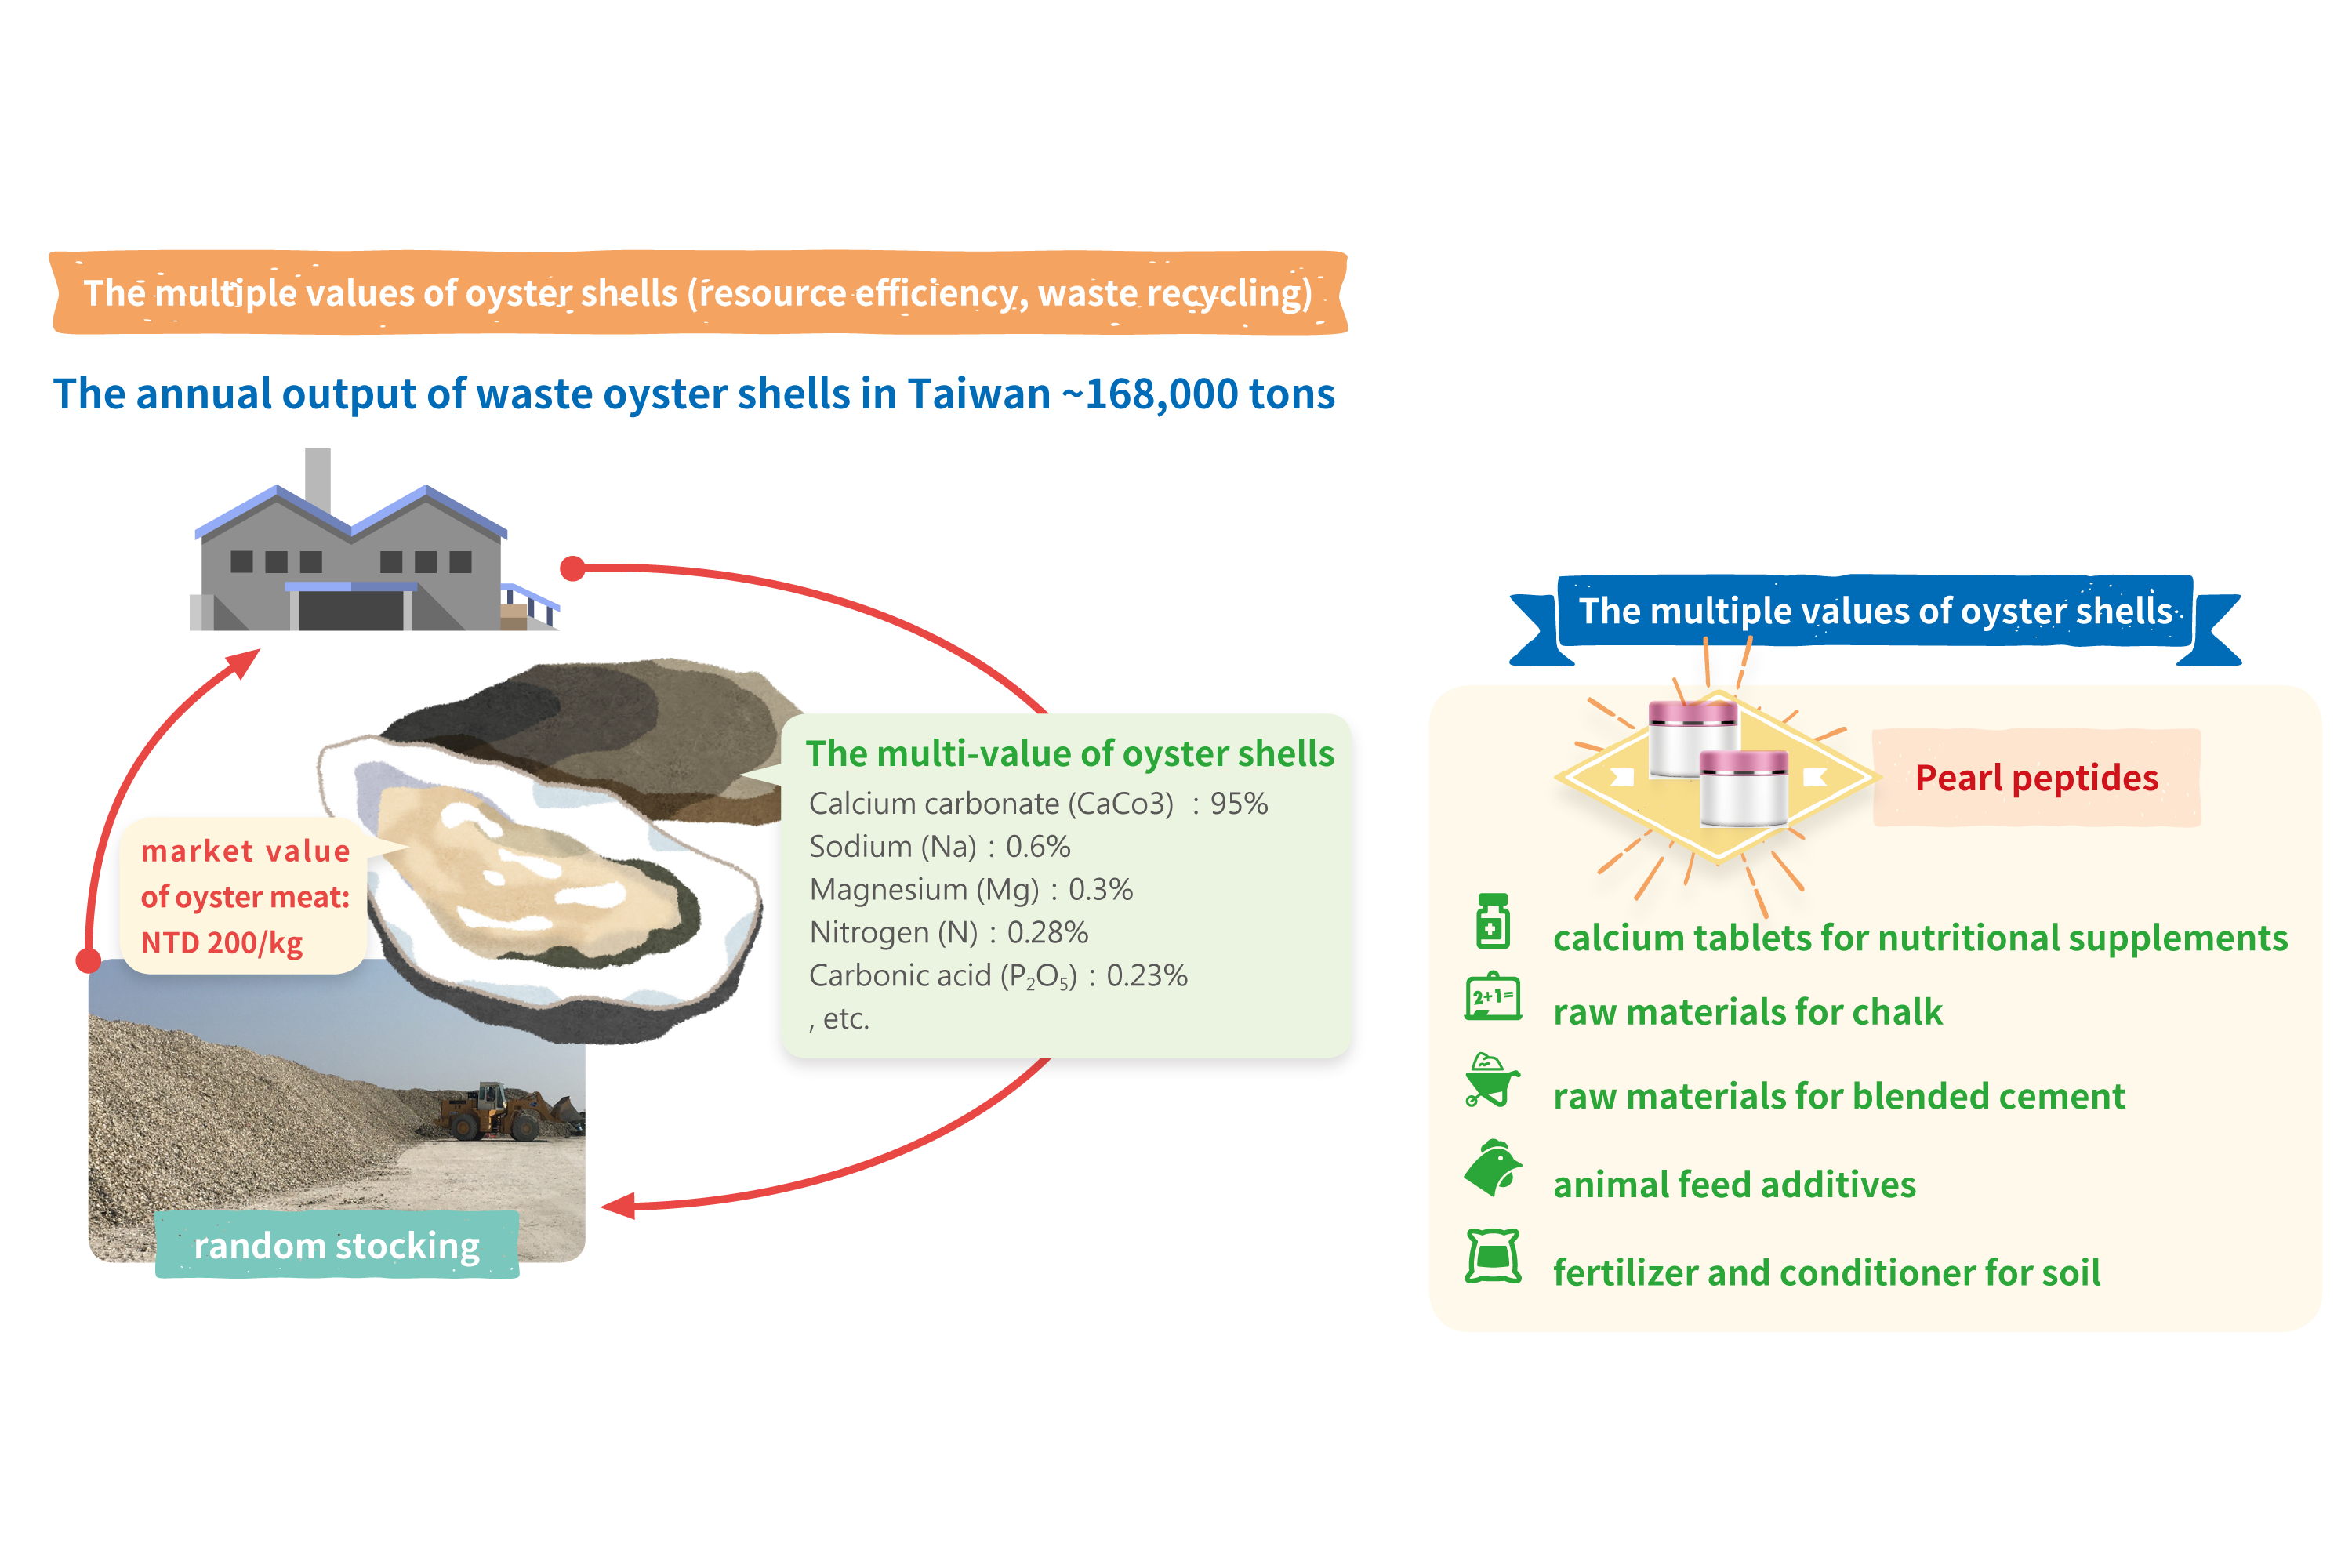 The multiple values of oyster shells (resource efficiency, waste recycling)